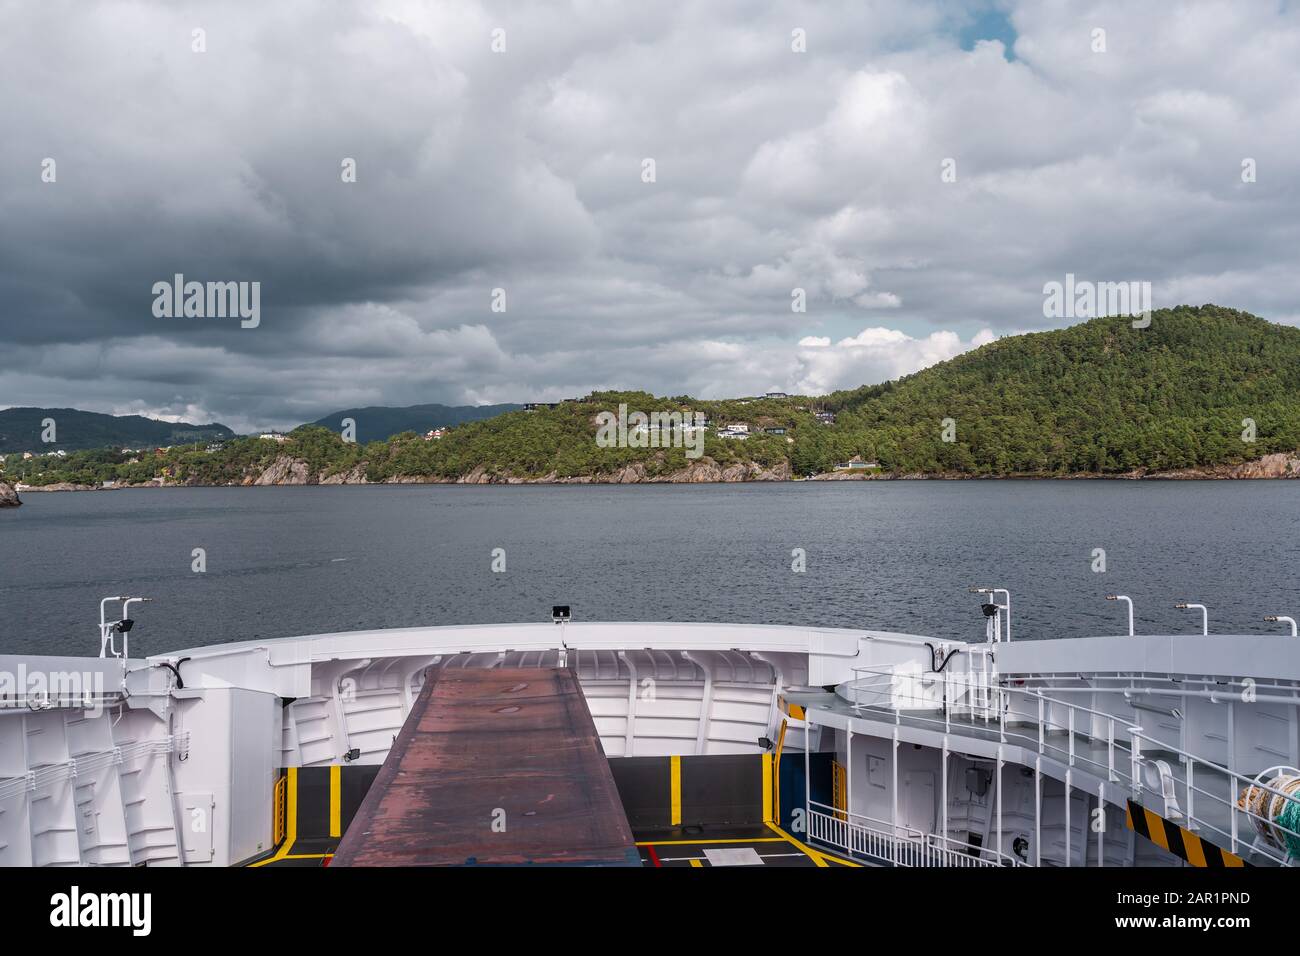 Norway, Truck being transported on a car ferry from Halhjem to Sandvikvåg with land in sight Stock Photo